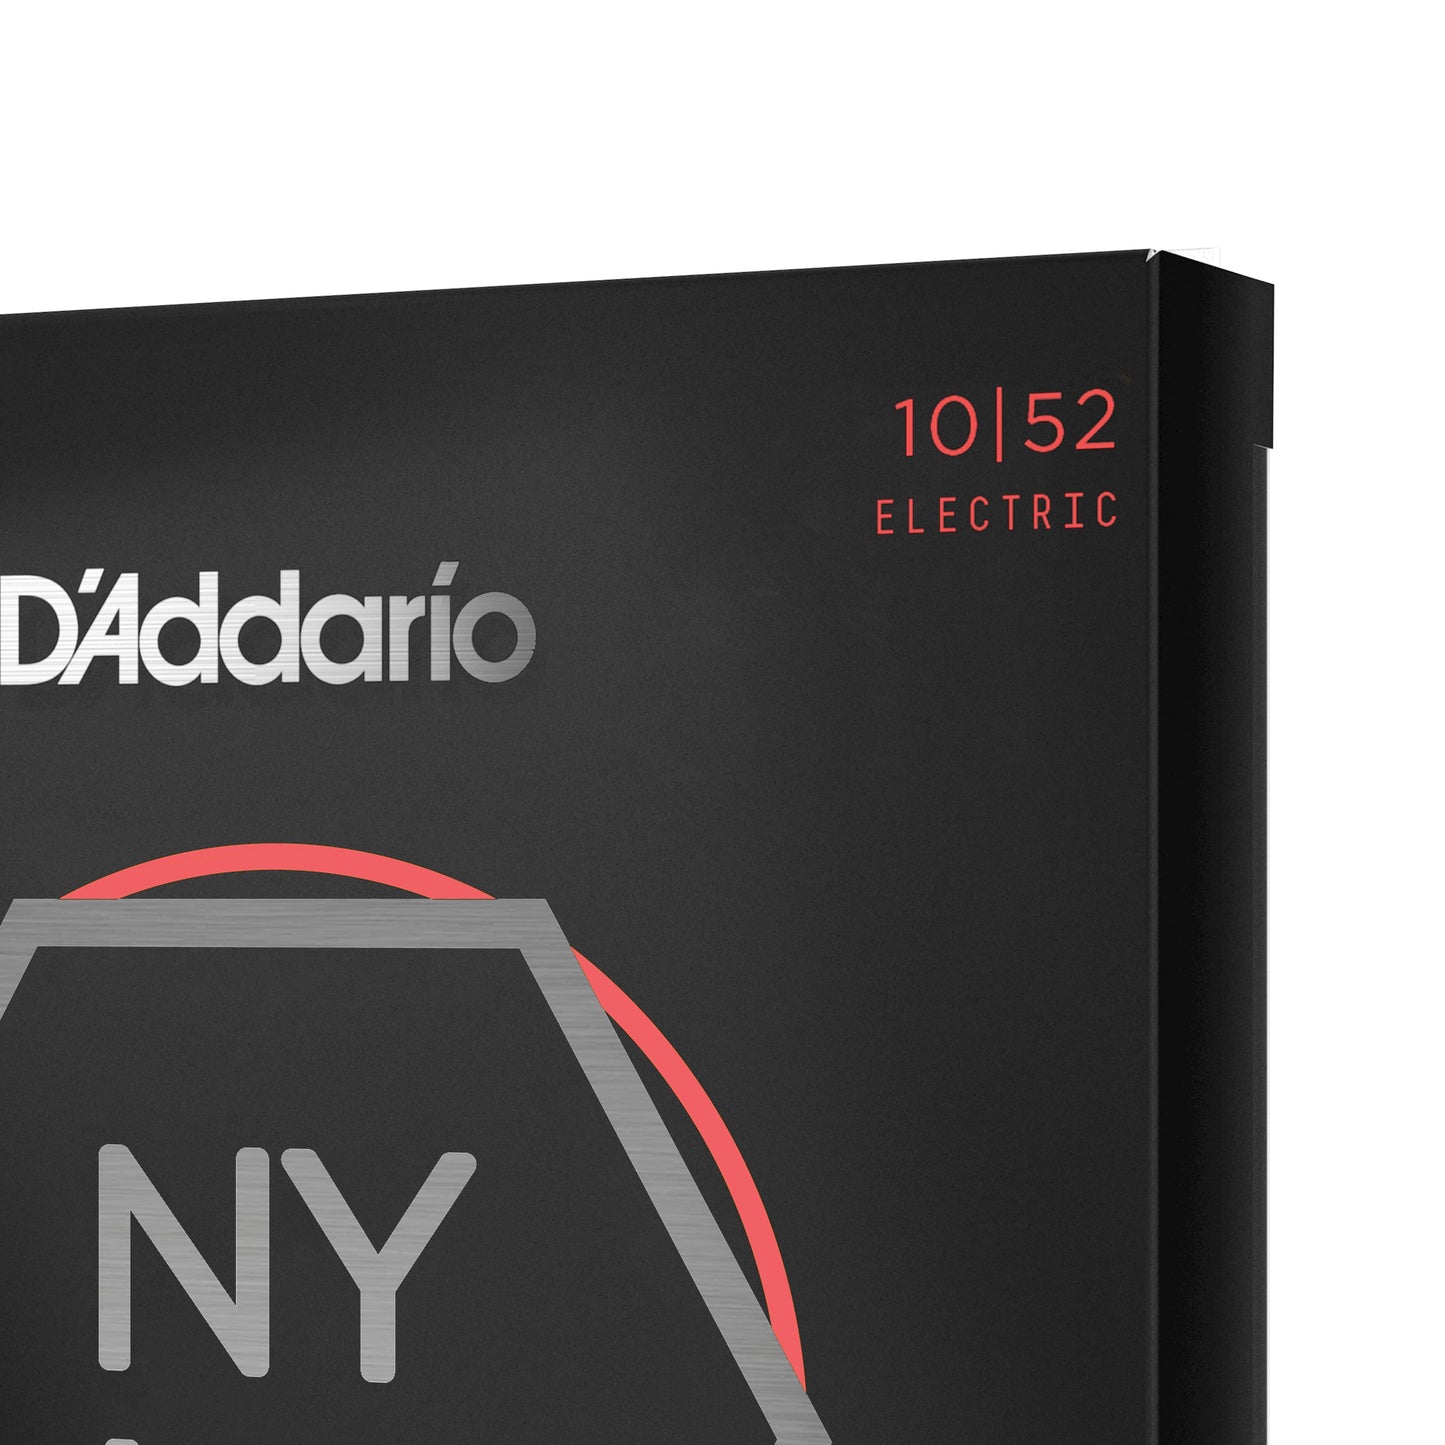 D'Addario NYXL10523P Light Heavy 3-Pack of Nickel Wound Electric Guitar Strings